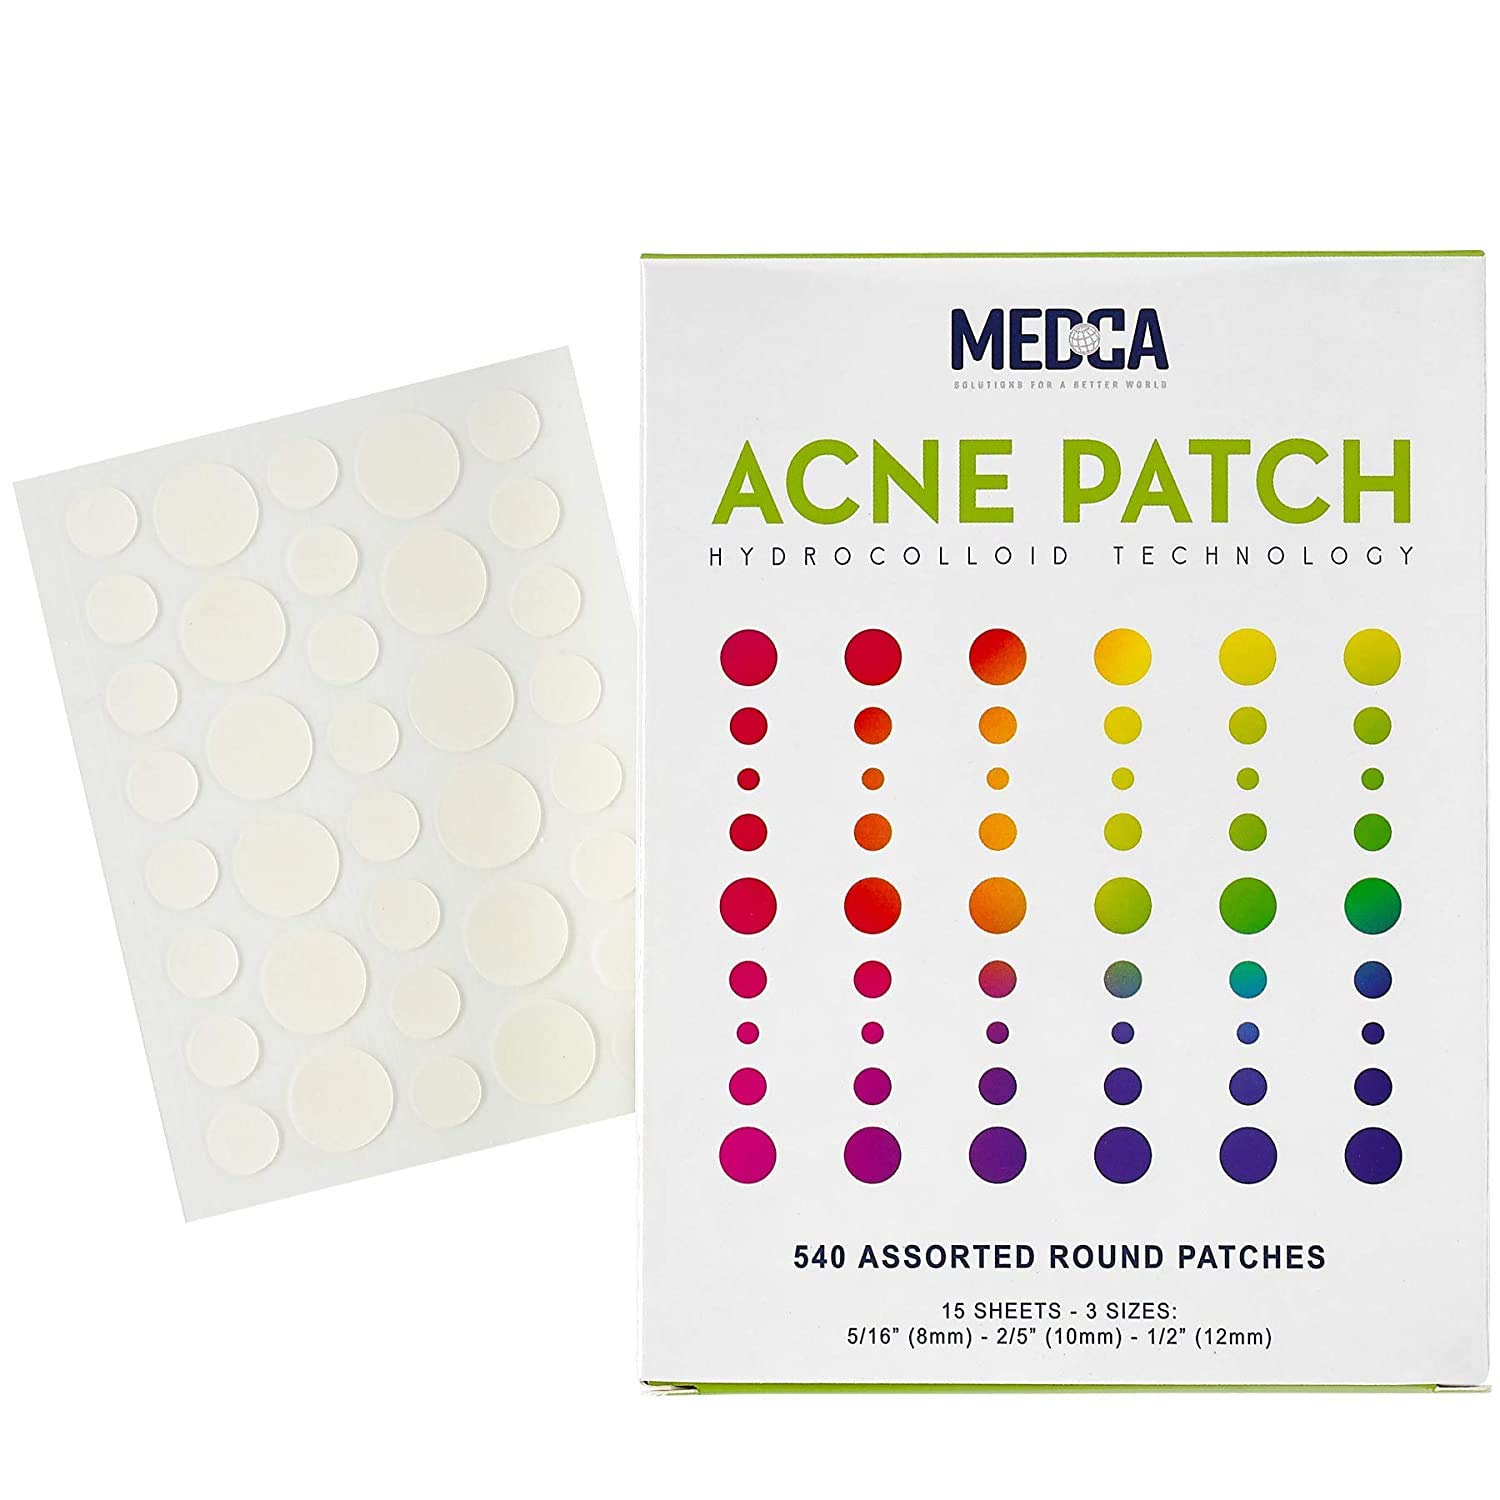 MEDca Acne Patches for Face - Hydrocolloid Bandages (540 Count) Zits, Acne, Pimple Patch in 3 Universal Sizes - image 1 of 8